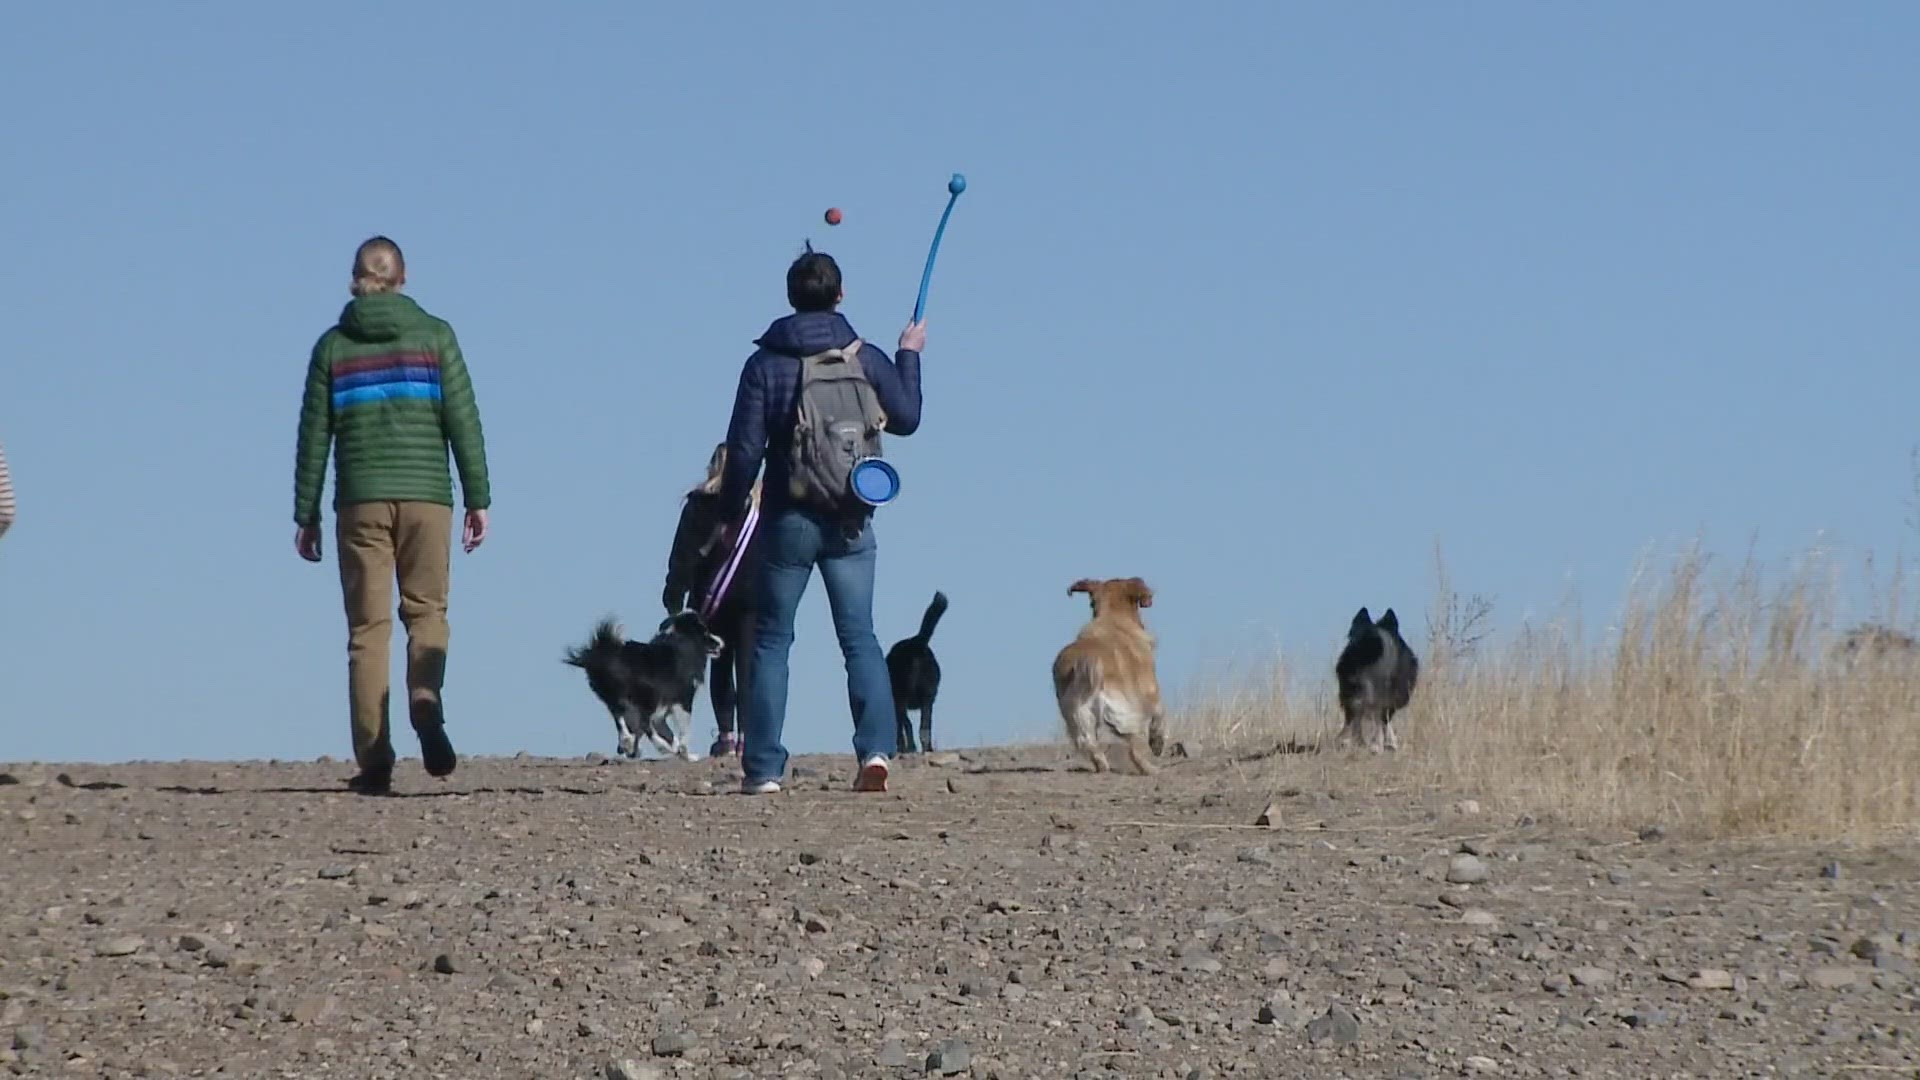 Westminster Hills Open Space houses the city's largest off-leash dog park, but the city may shrink the dog park's size and switch to on-leash.